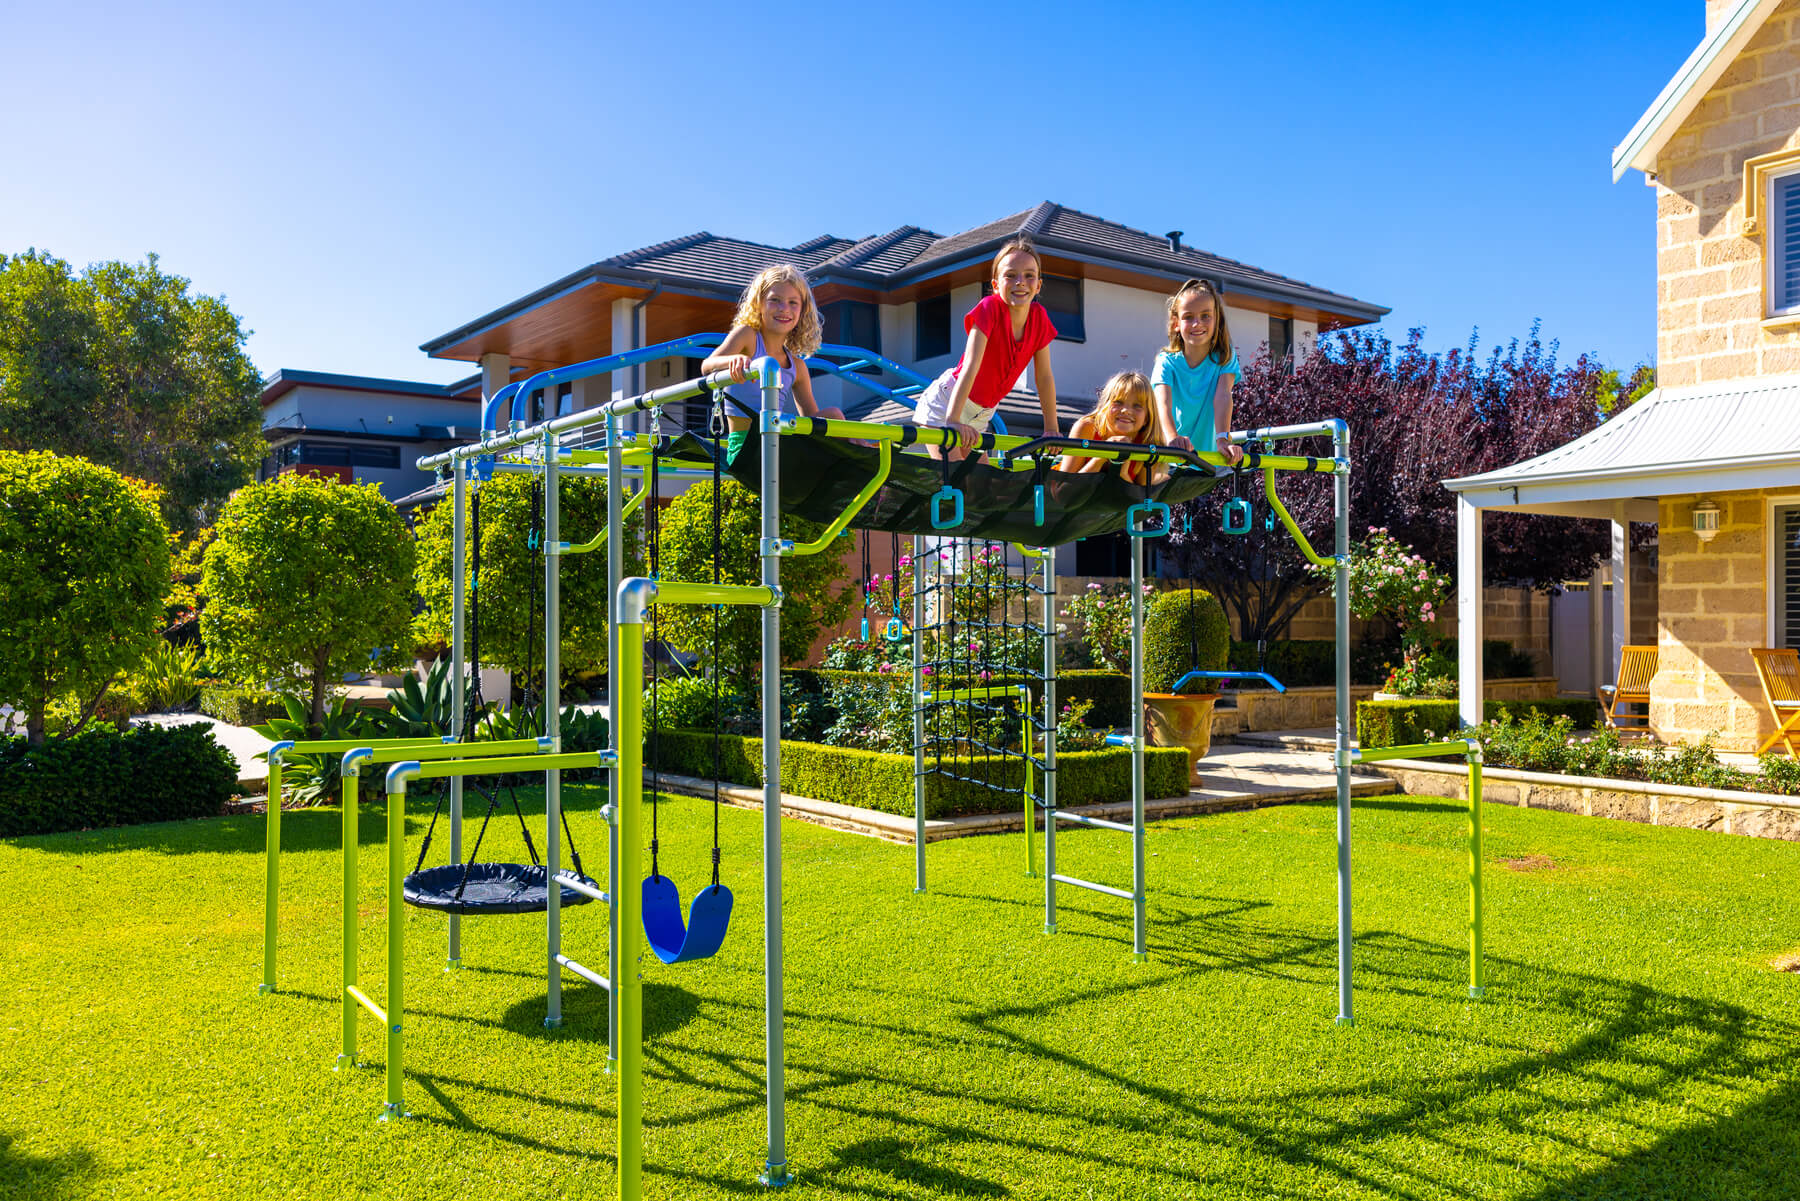 Are Climbing Frames Good For Kids?